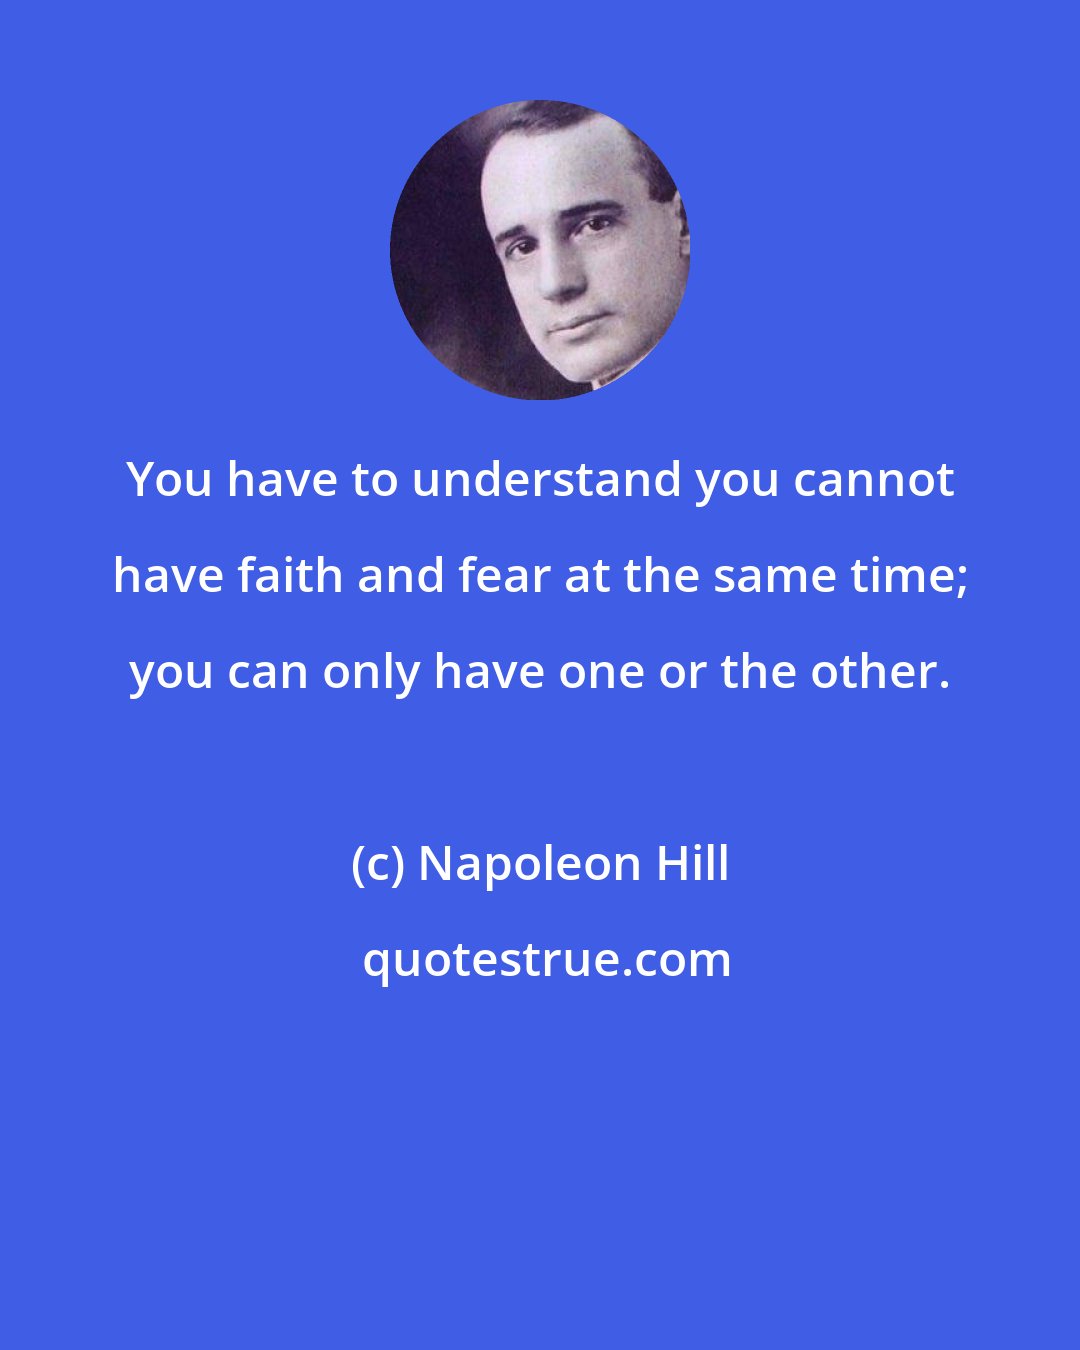 Napoleon Hill: You have to understand you cannot have faith and fear at the same time; you can only have one or the other.